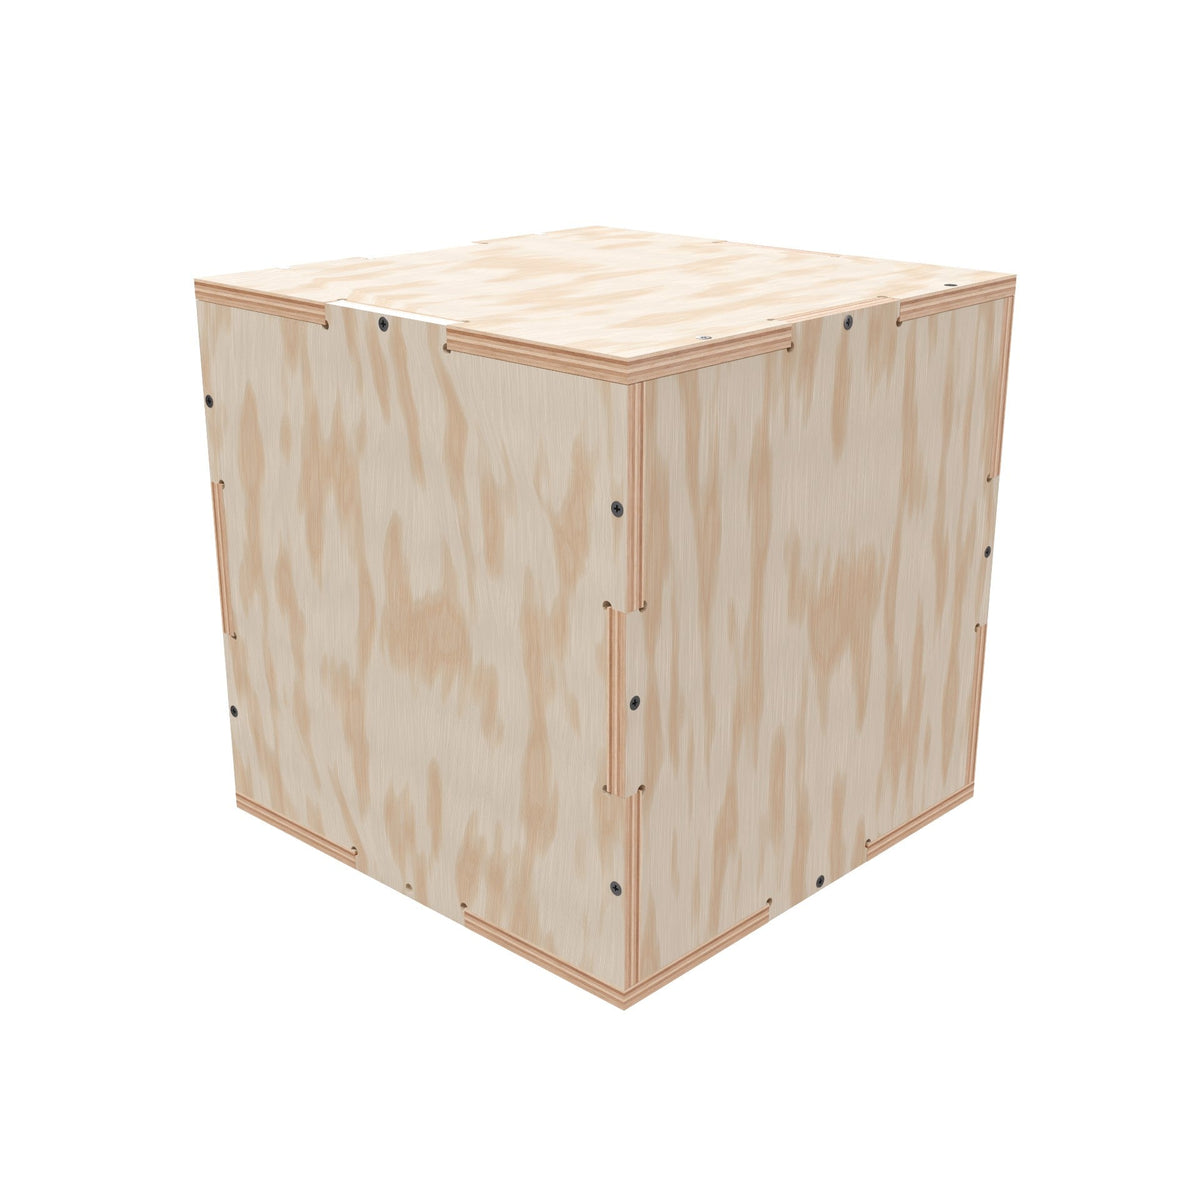 Plywood Shipping Crate 14x14x14